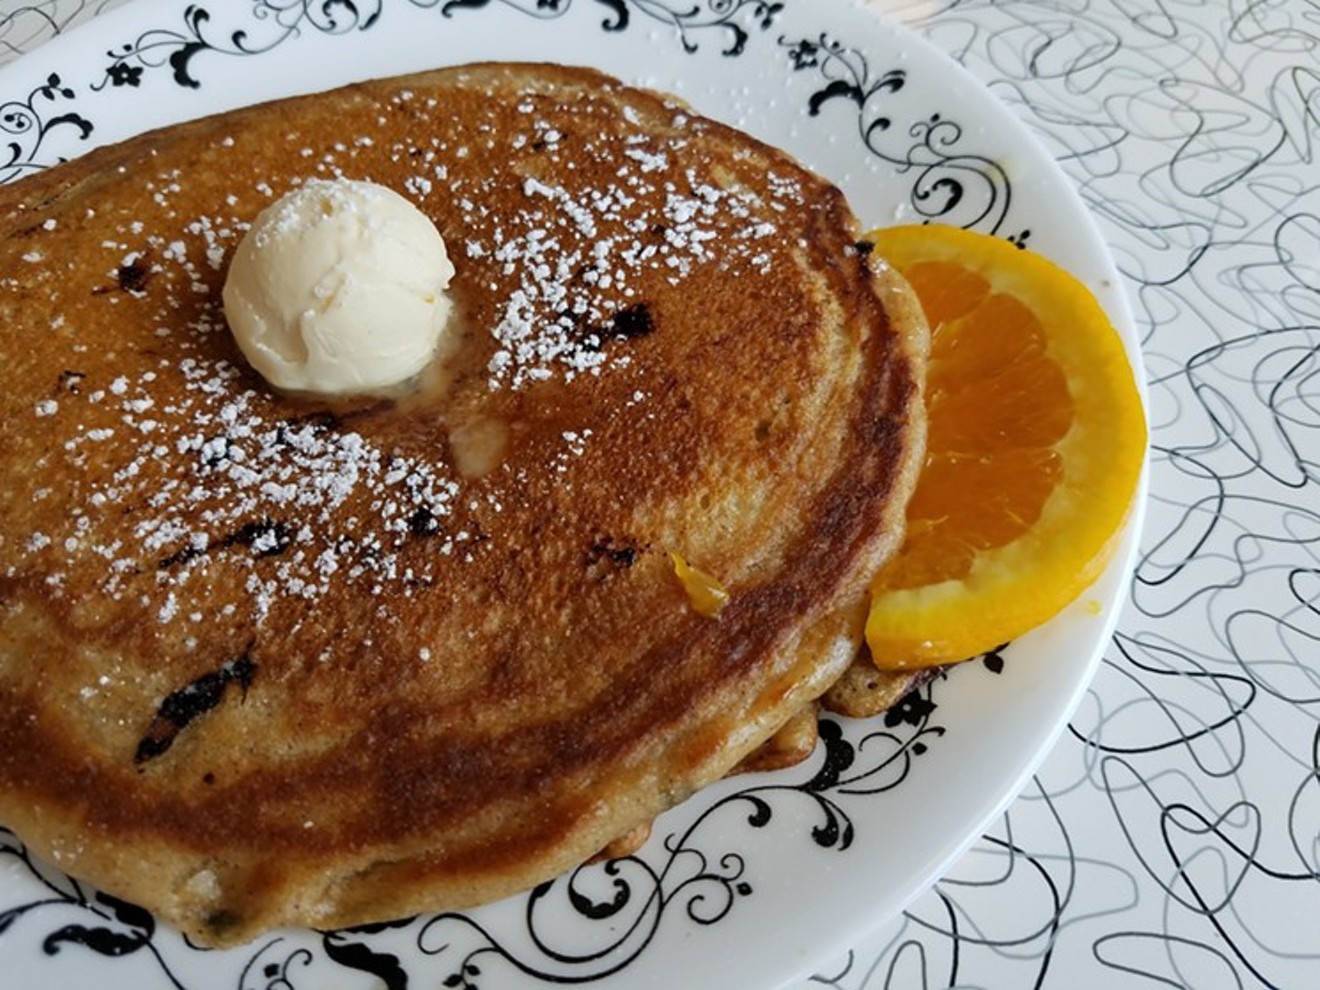 Pancakes! (Pajamas not included.) Get your fill of hotcakes while in the comfort of your PJs at Bishop Arts District's latest event.